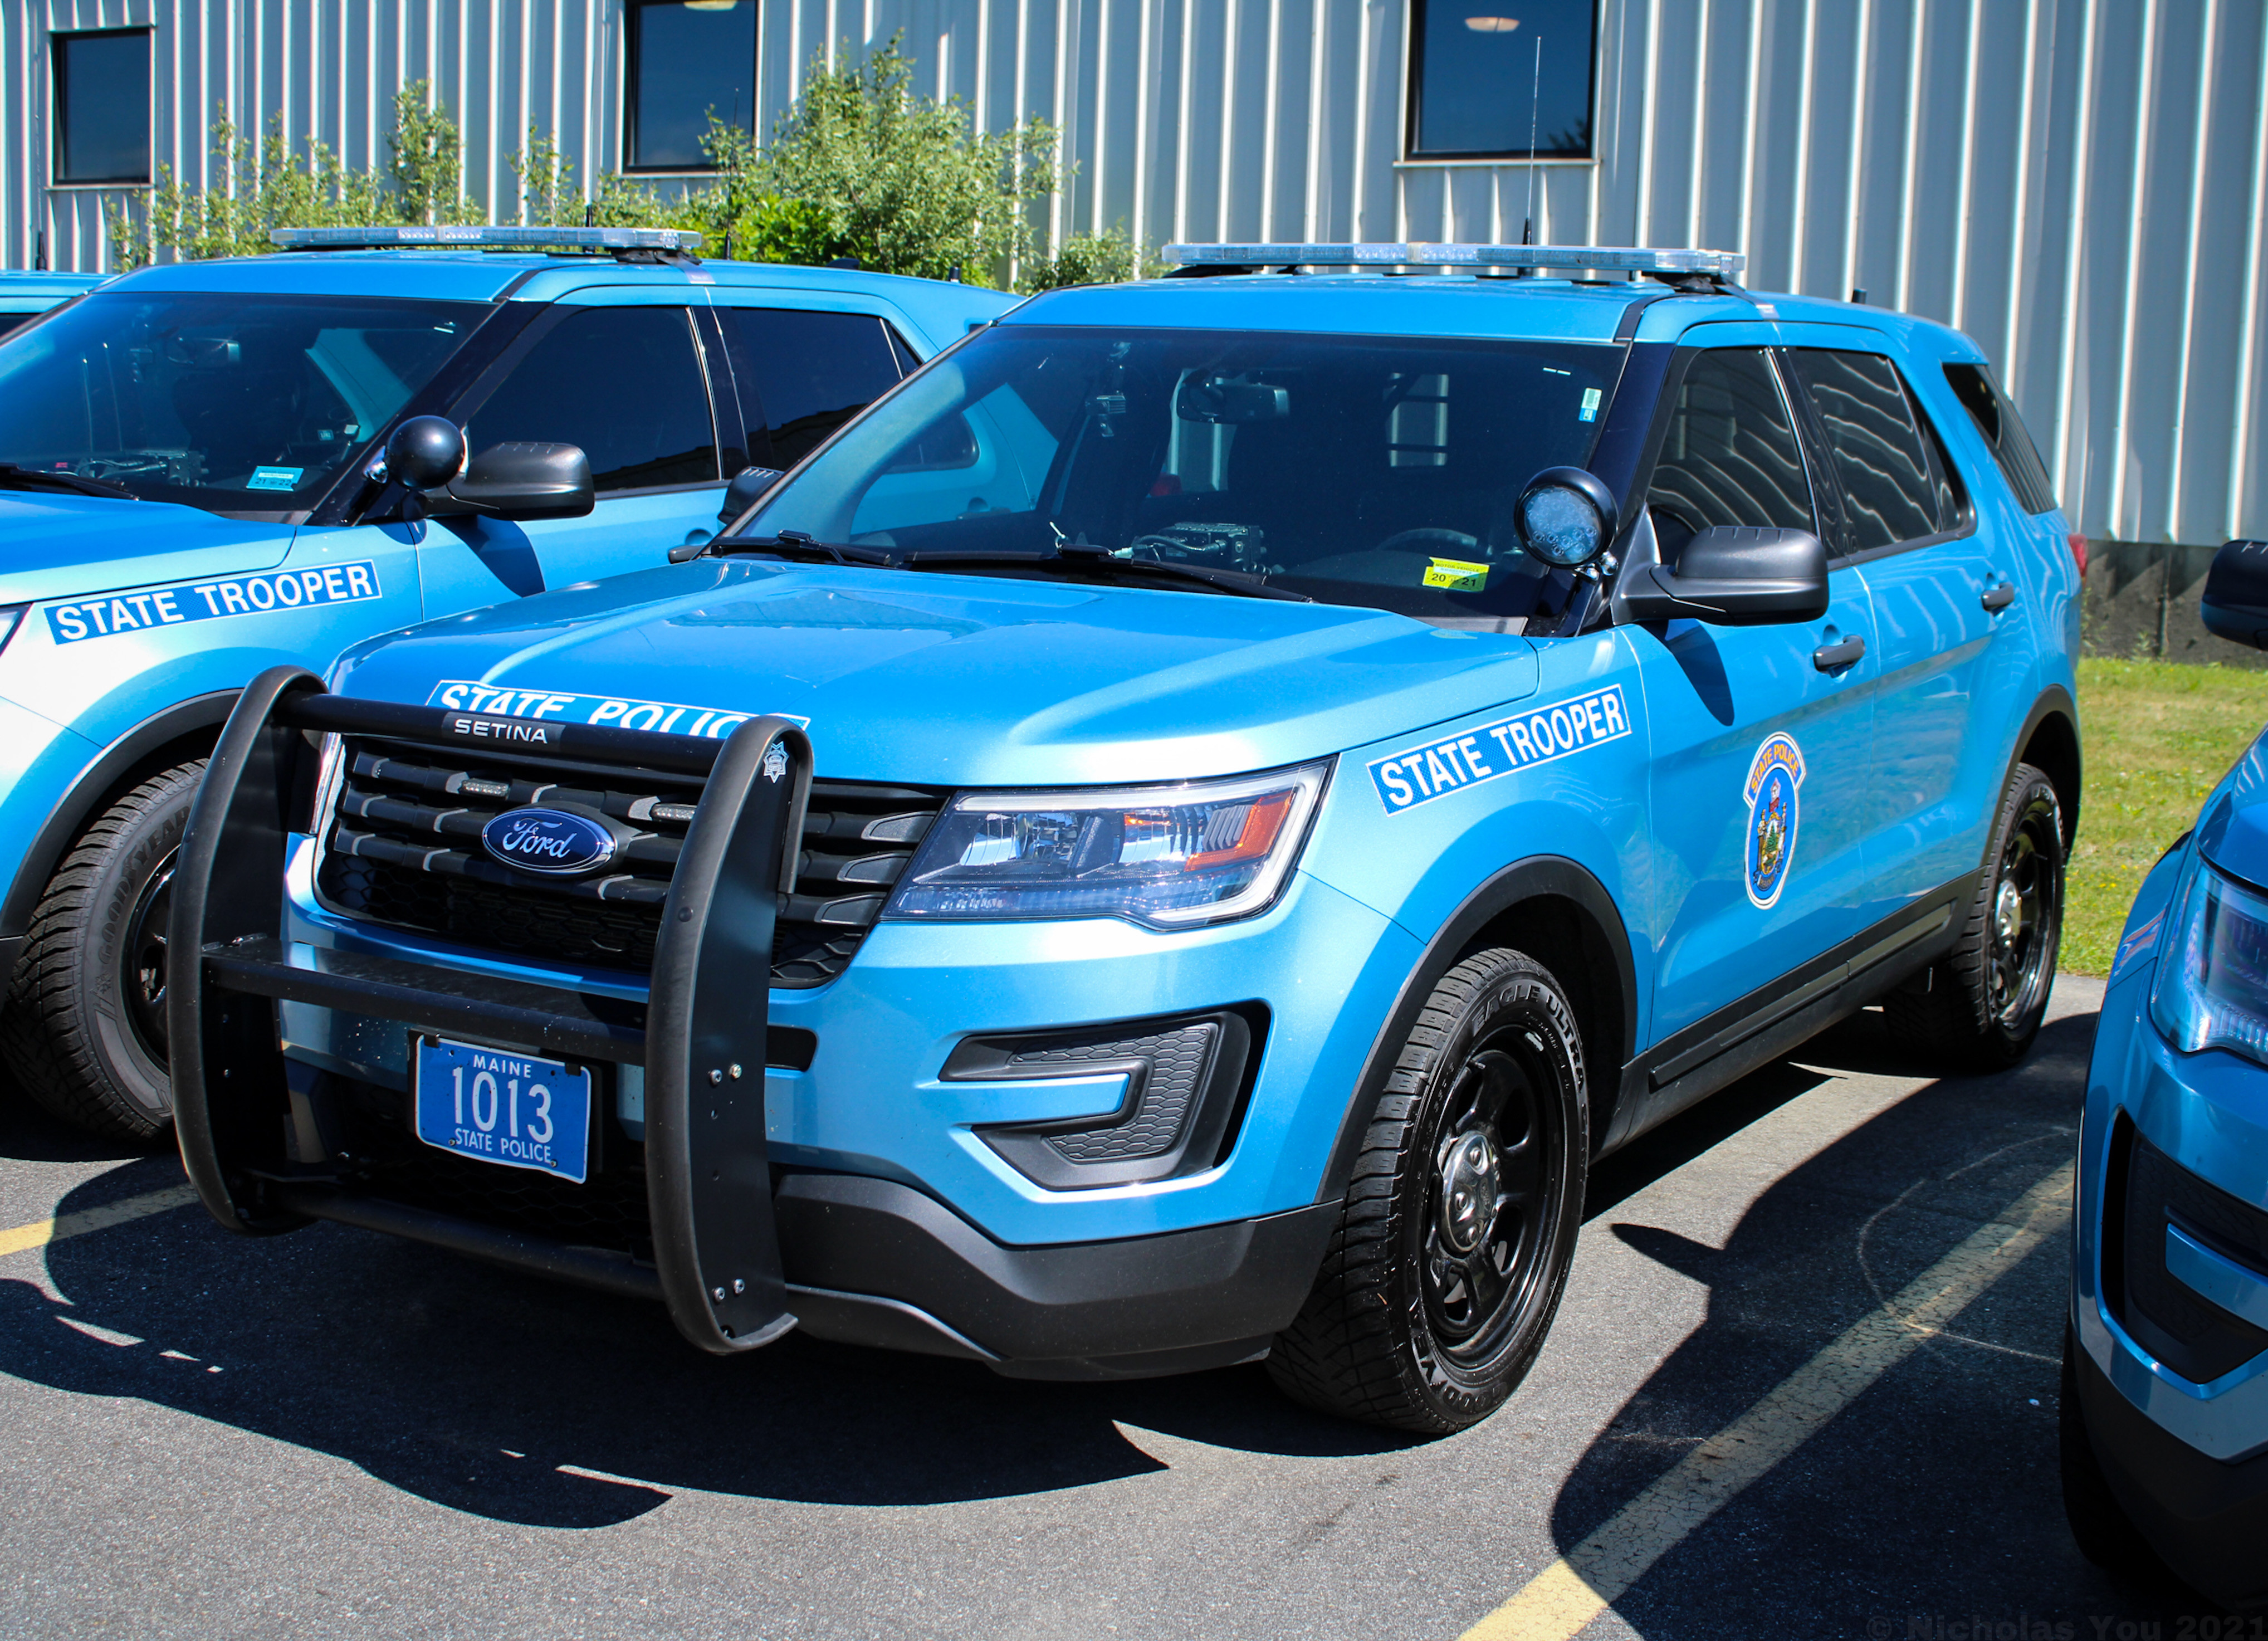 A photo  of Maine State Police
            Cruiser 1013, a 2016-2019 Ford Police Interceptor Utility             taken by Nicholas You